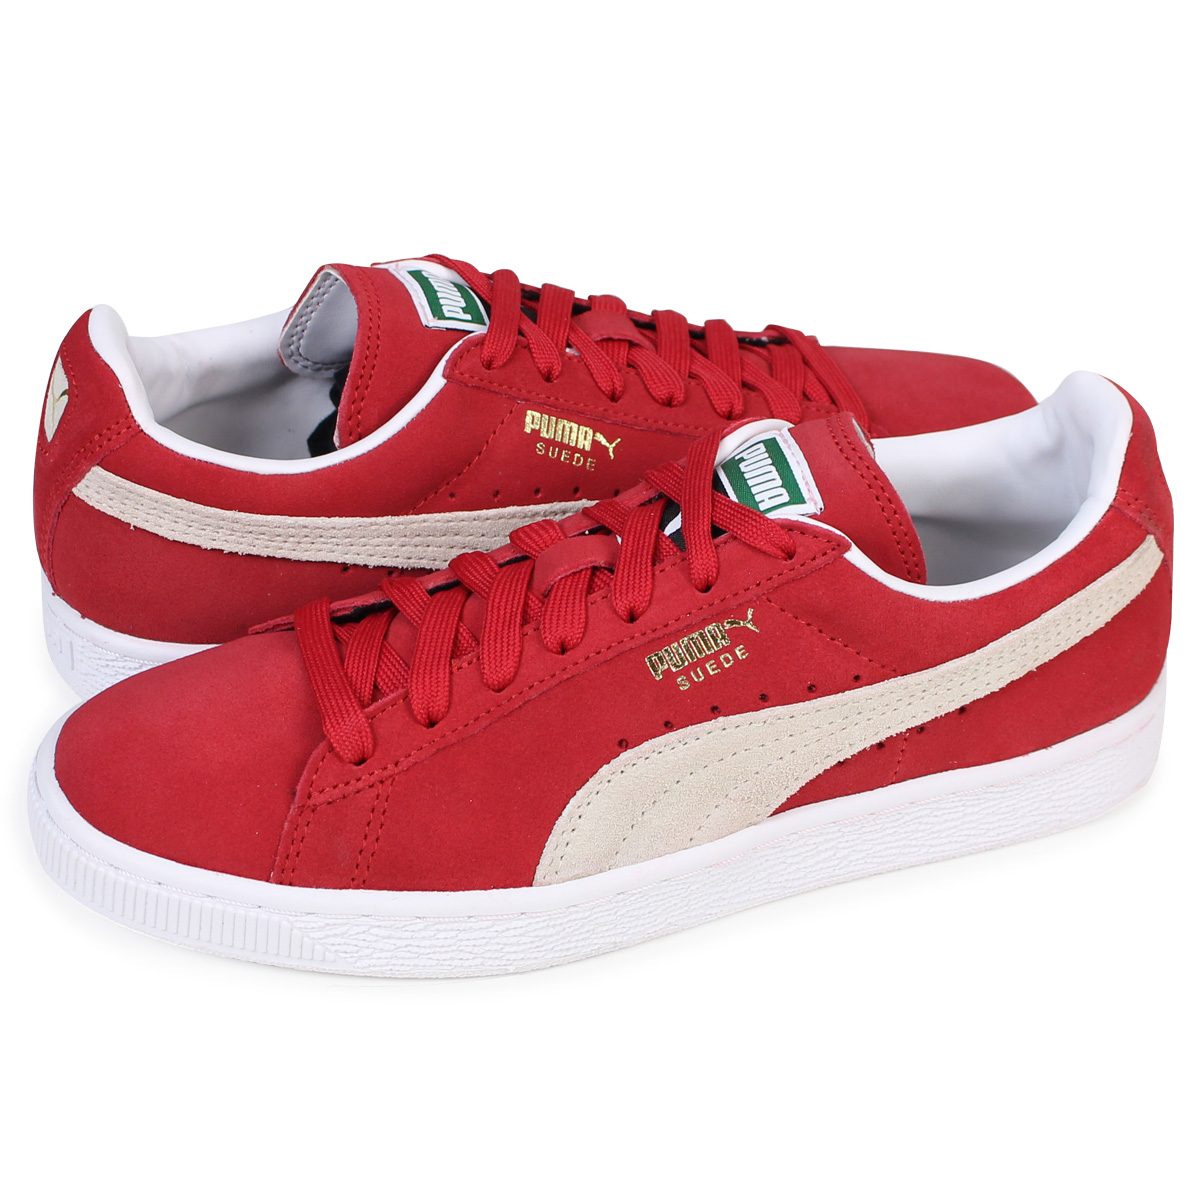 puma shoes suede red